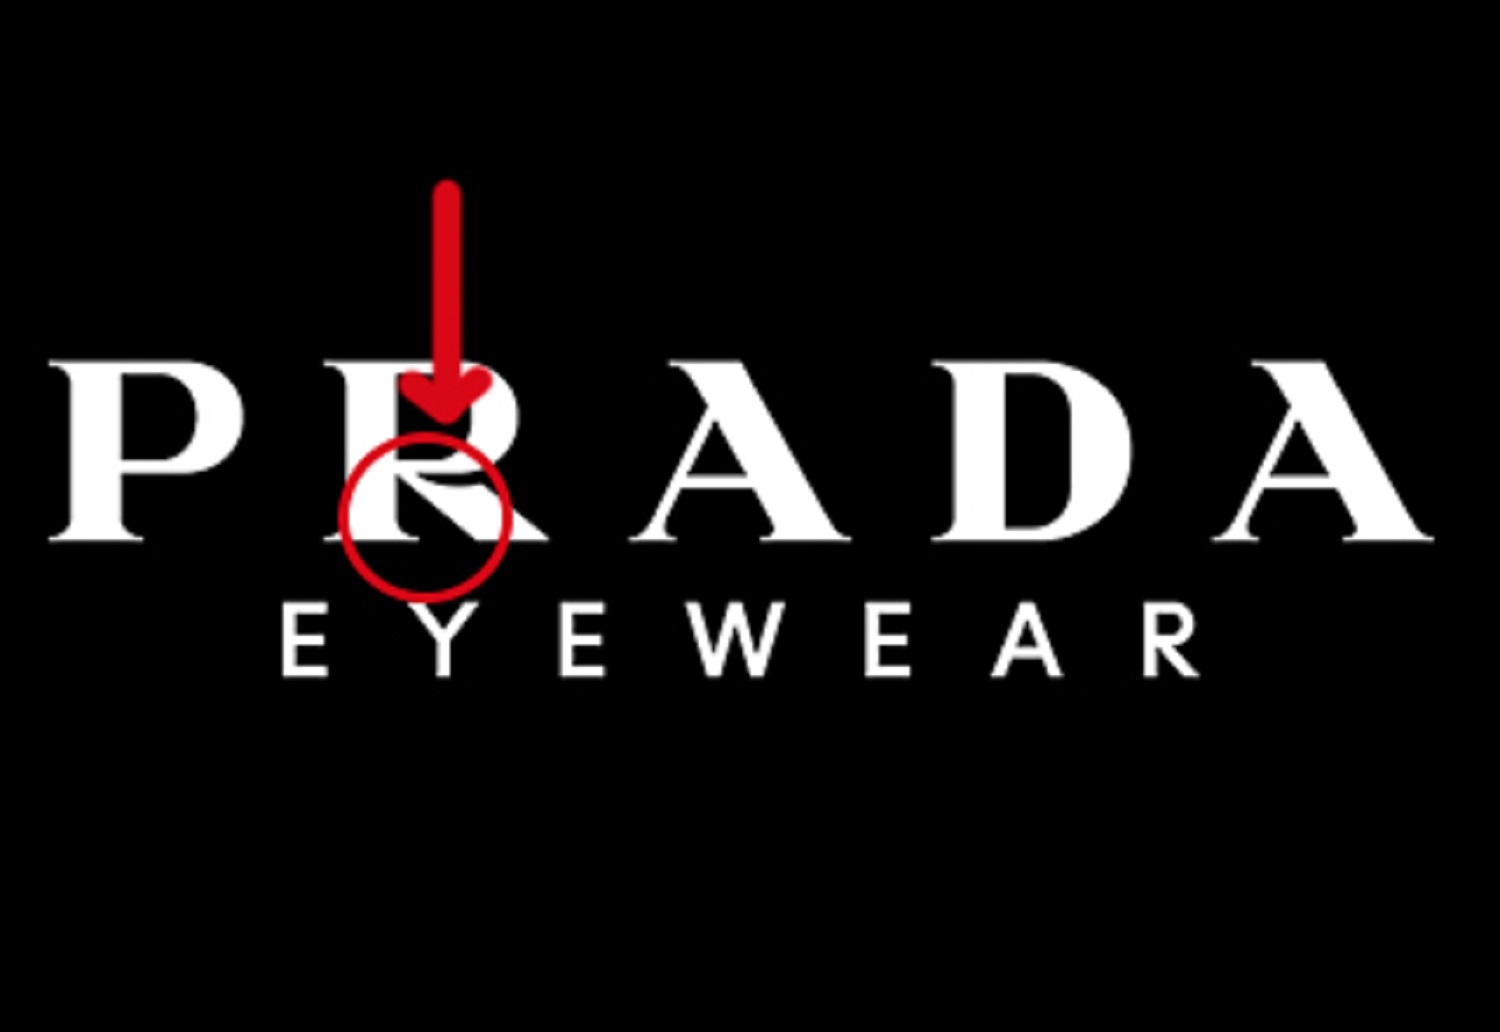 how to tell if prada sunglasses are real